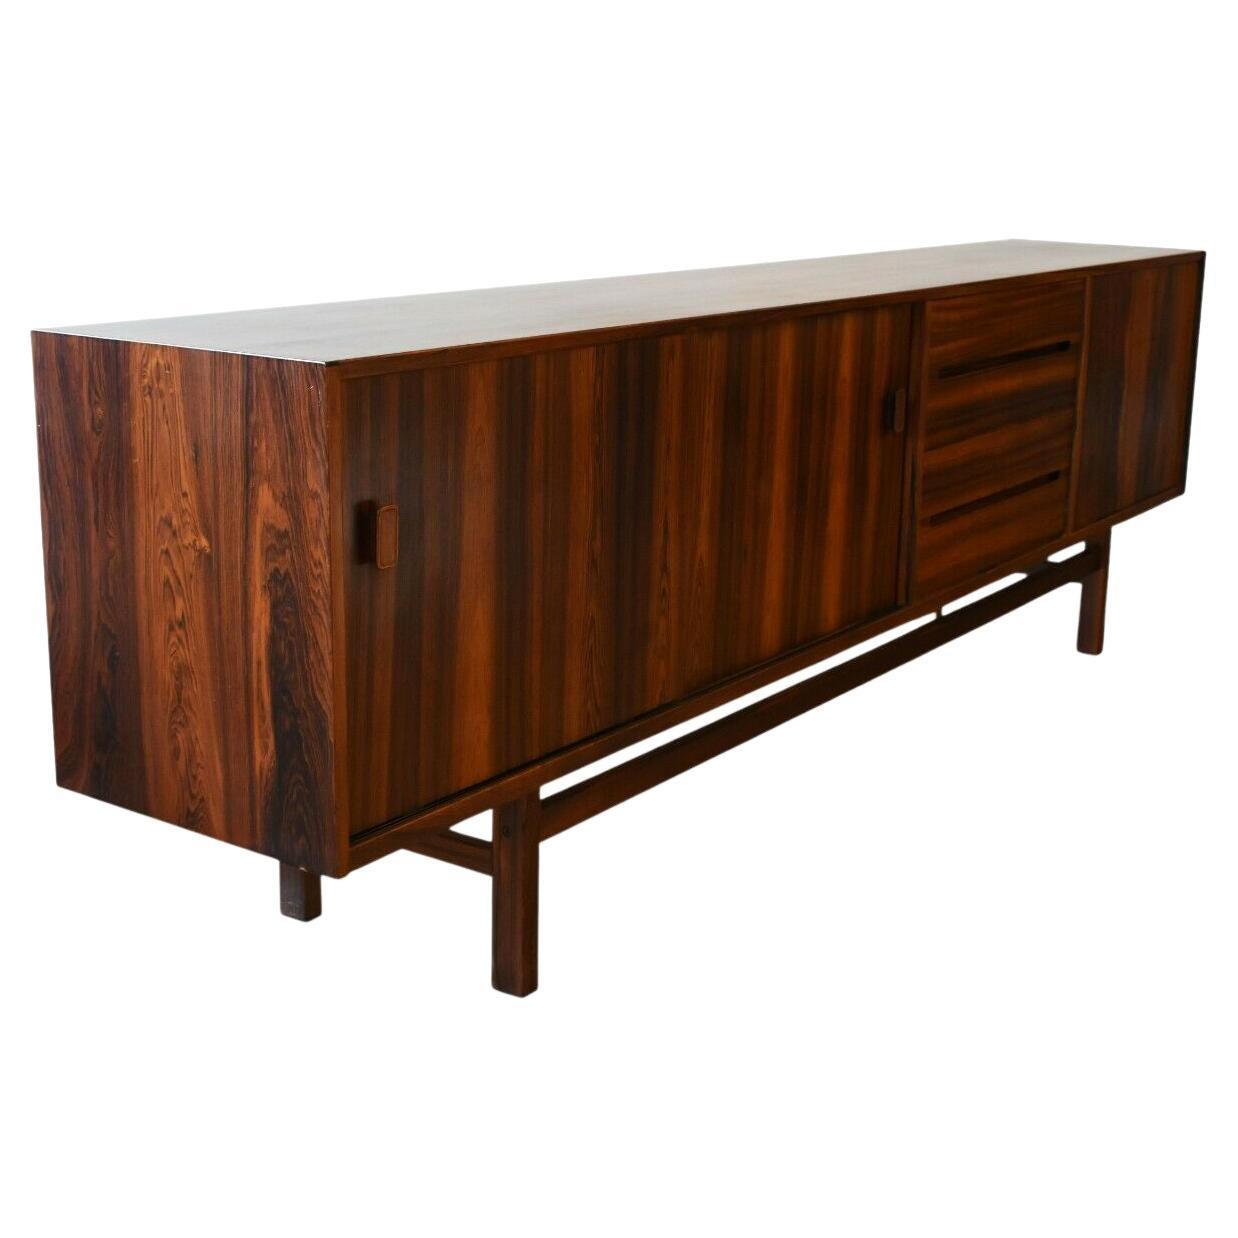 Mid 20th Century Rosewood Sideboard Designed by Nils Jonsson for Troeds